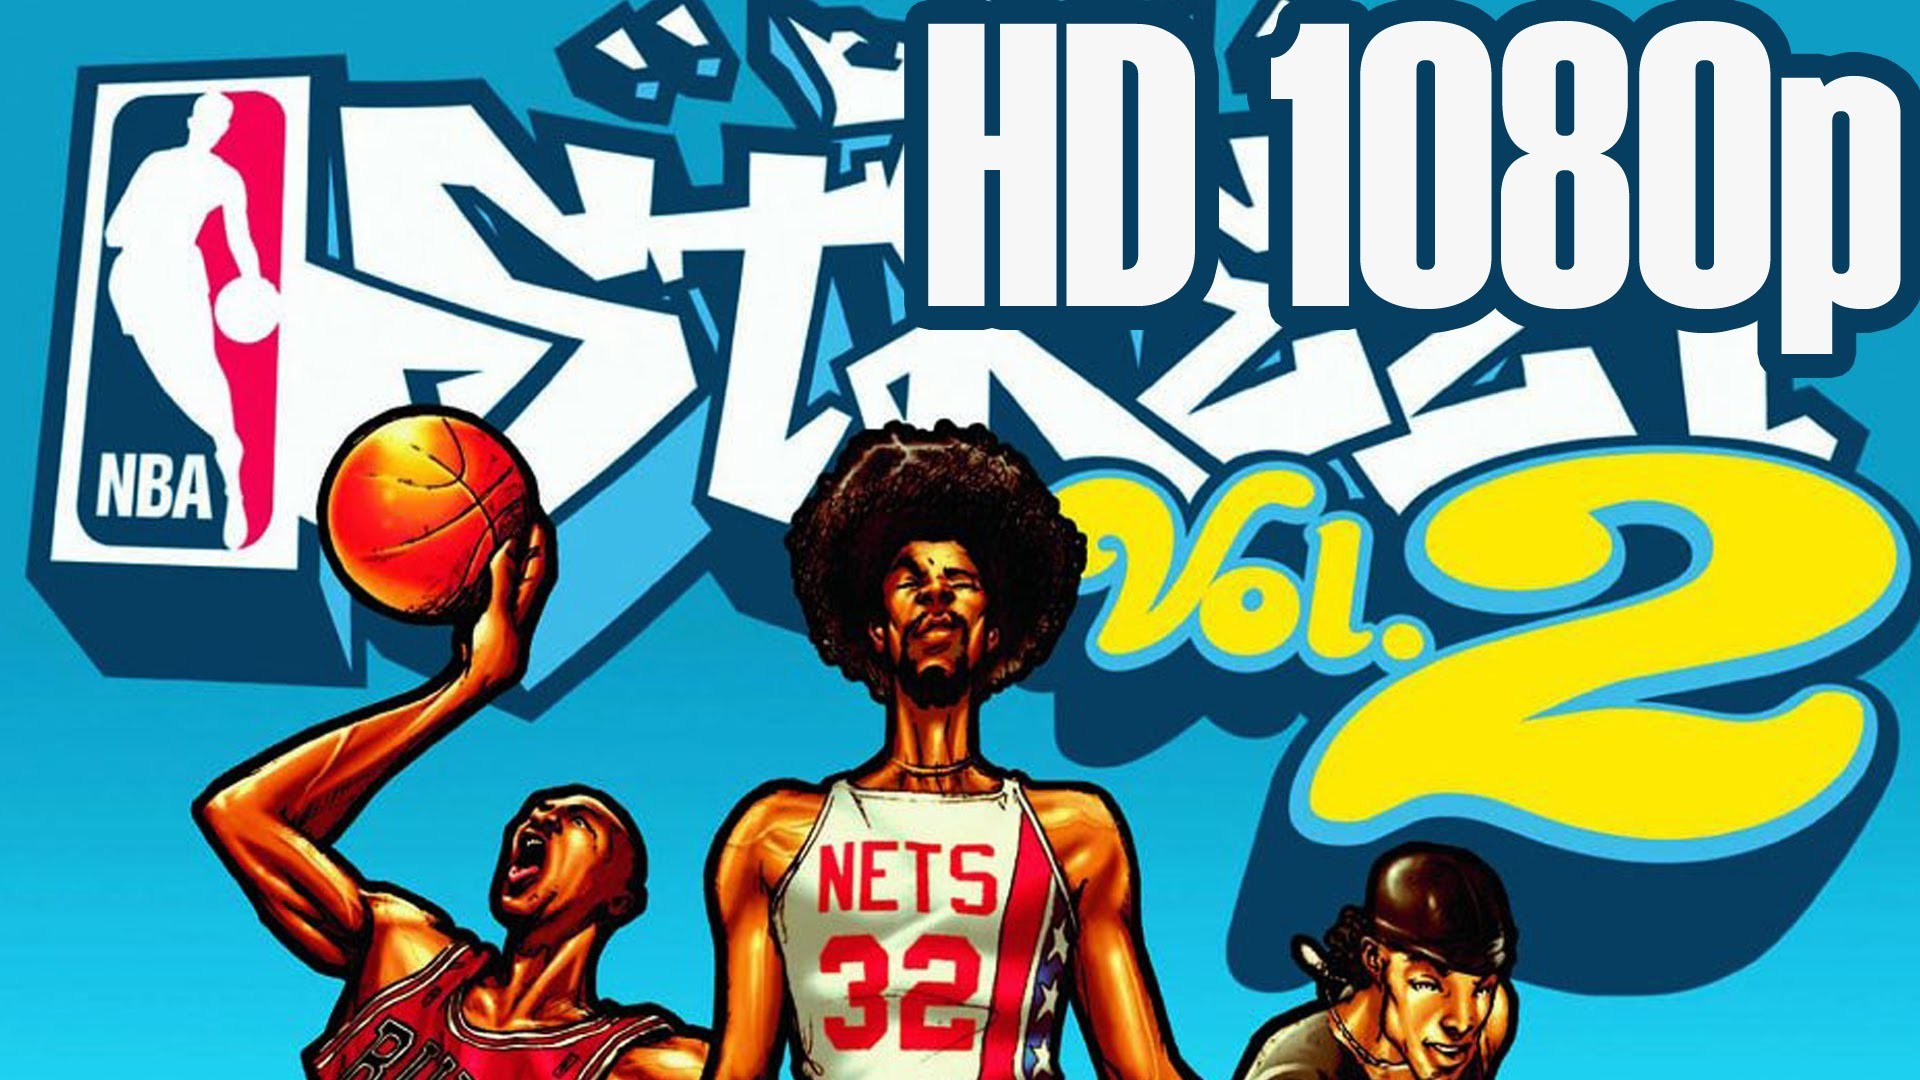 1920x1080 NBA Street Vol.2 in HD Commentary 1080p - YouTube